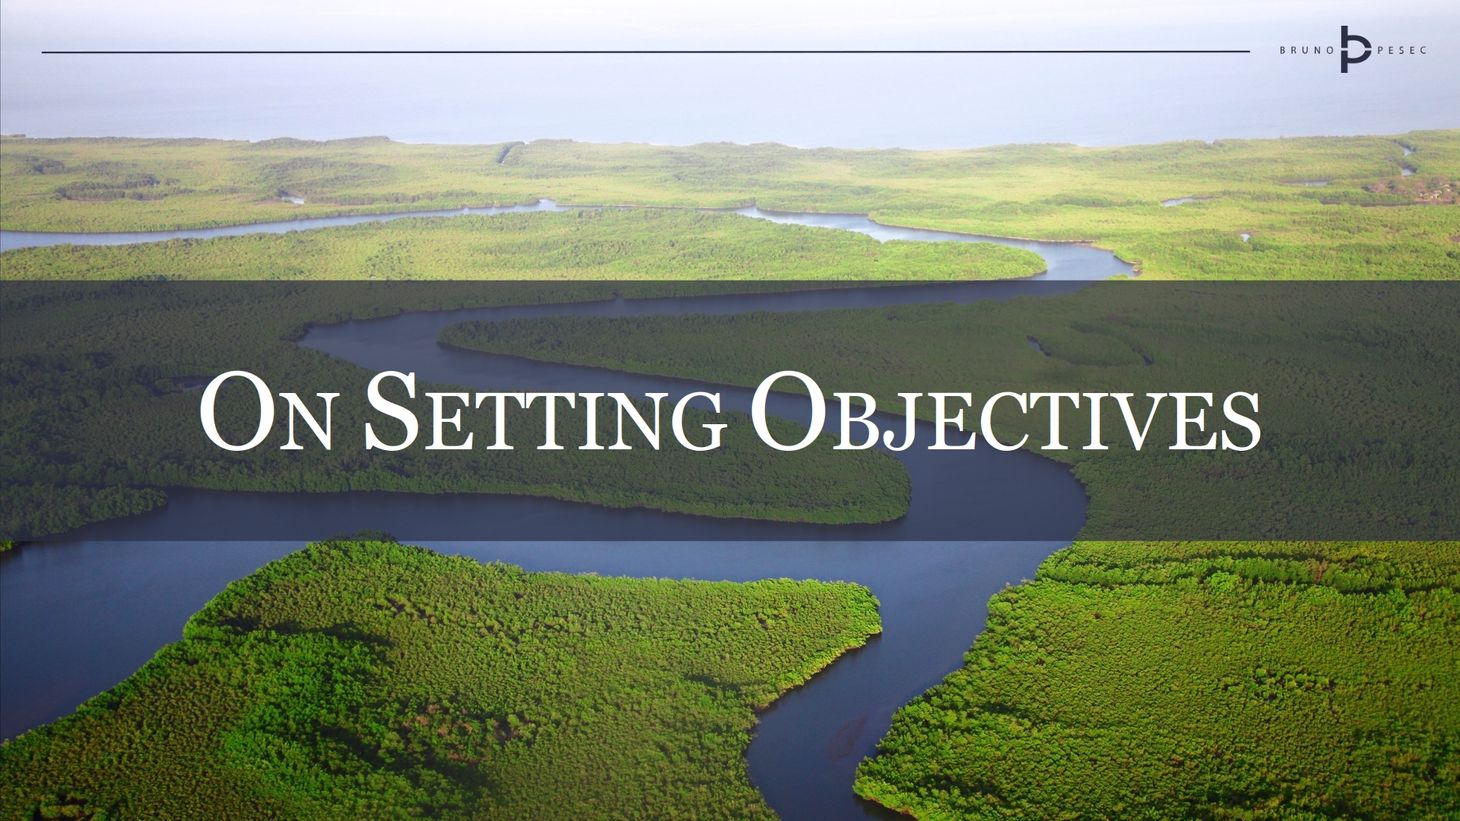 On setting objectives